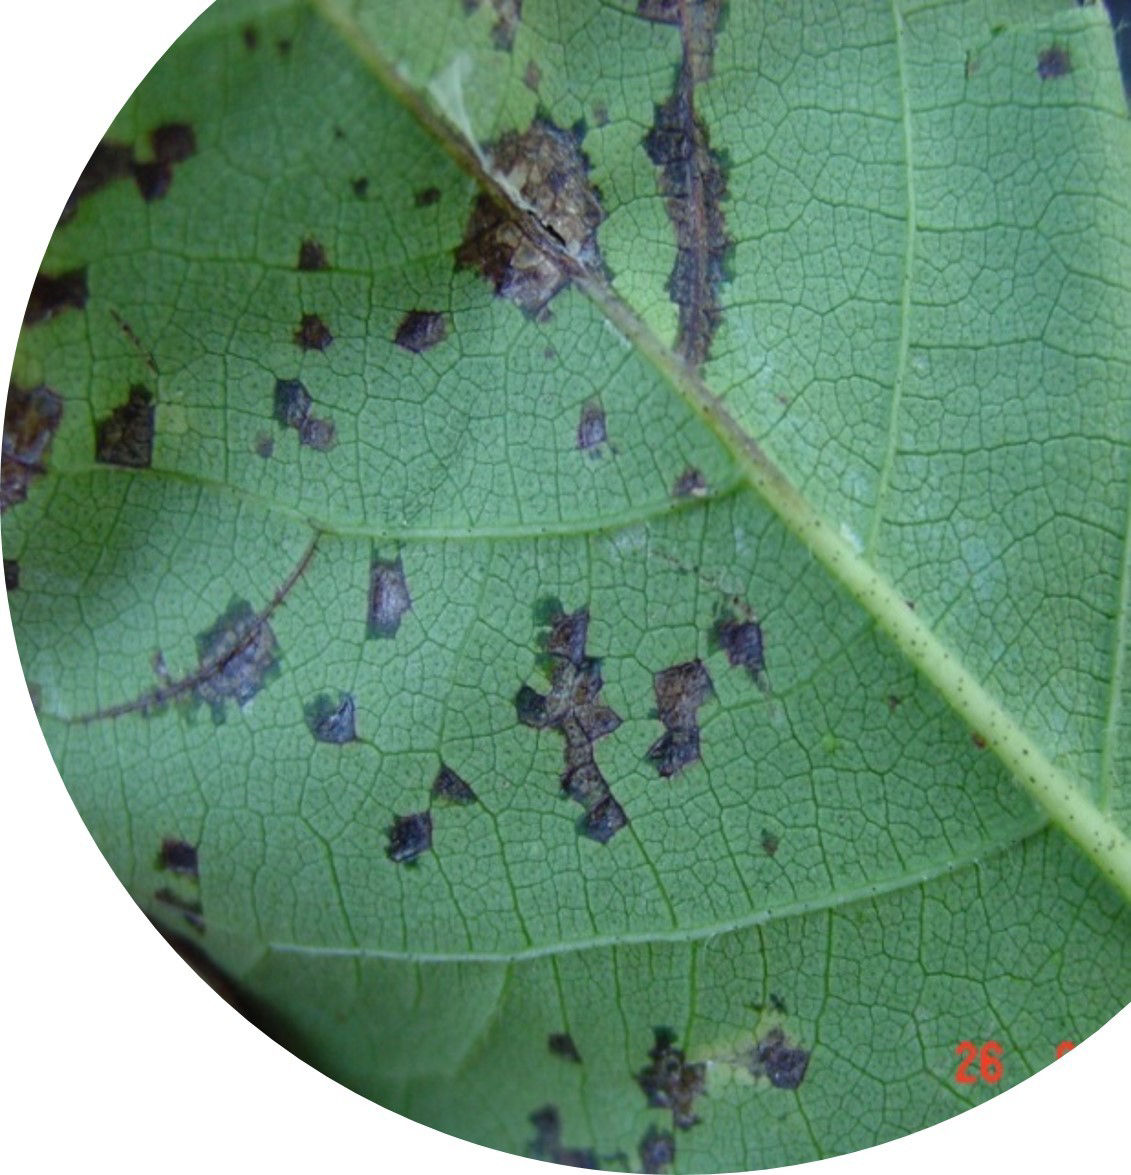 Figure 2. Bacterial blight lesions defined by leaf veins. 